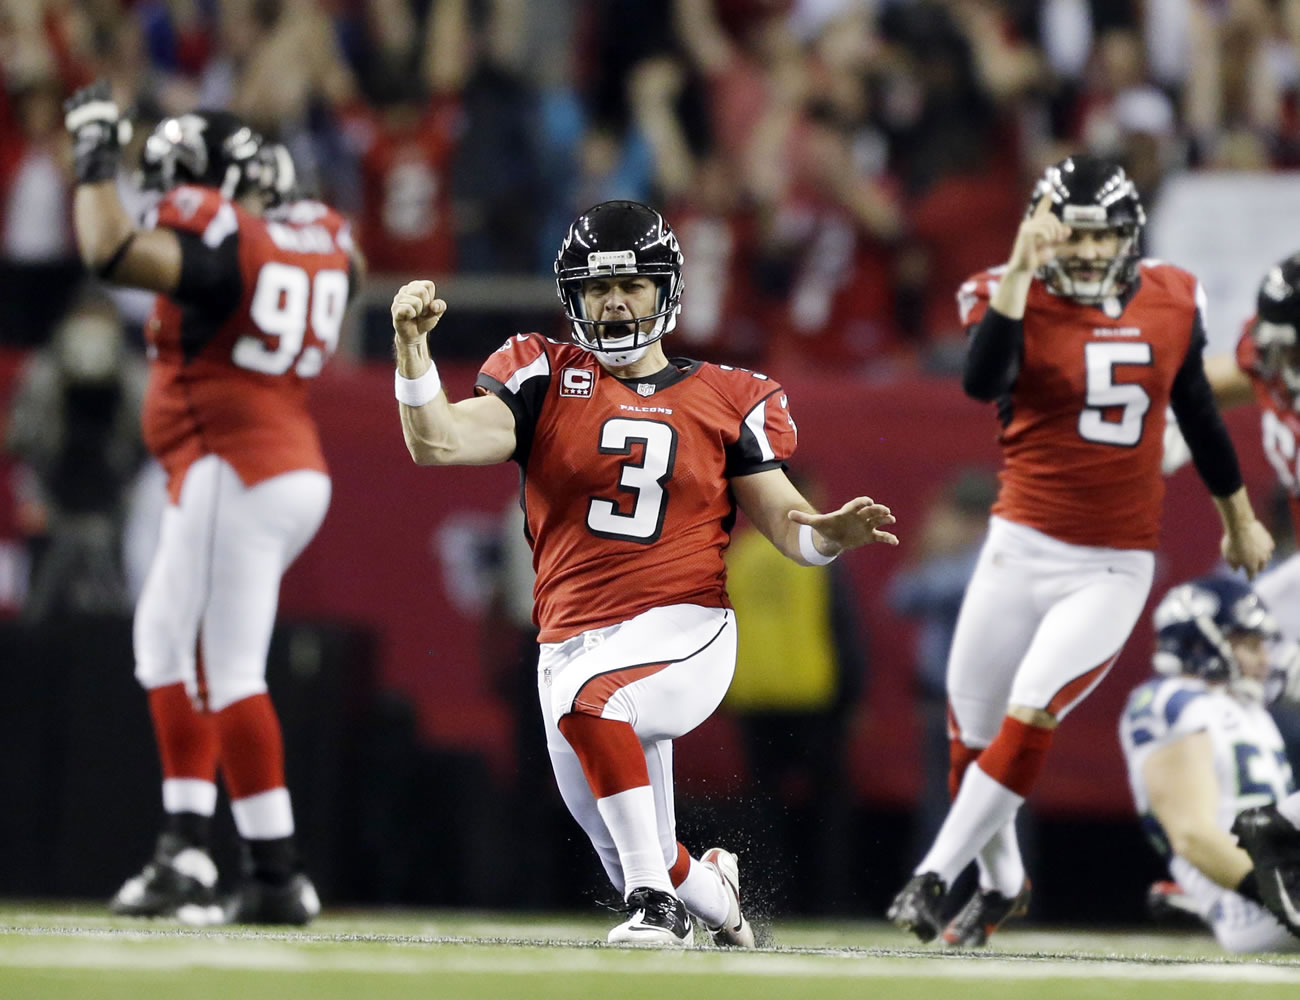 Atlanta Falcons kicker Matt Bryant (3) celebrates his game-winning field goal against the Seattle Seahawks in the closing seconds of Sunday's NFC divisional playoff game at the Georgia Dome.